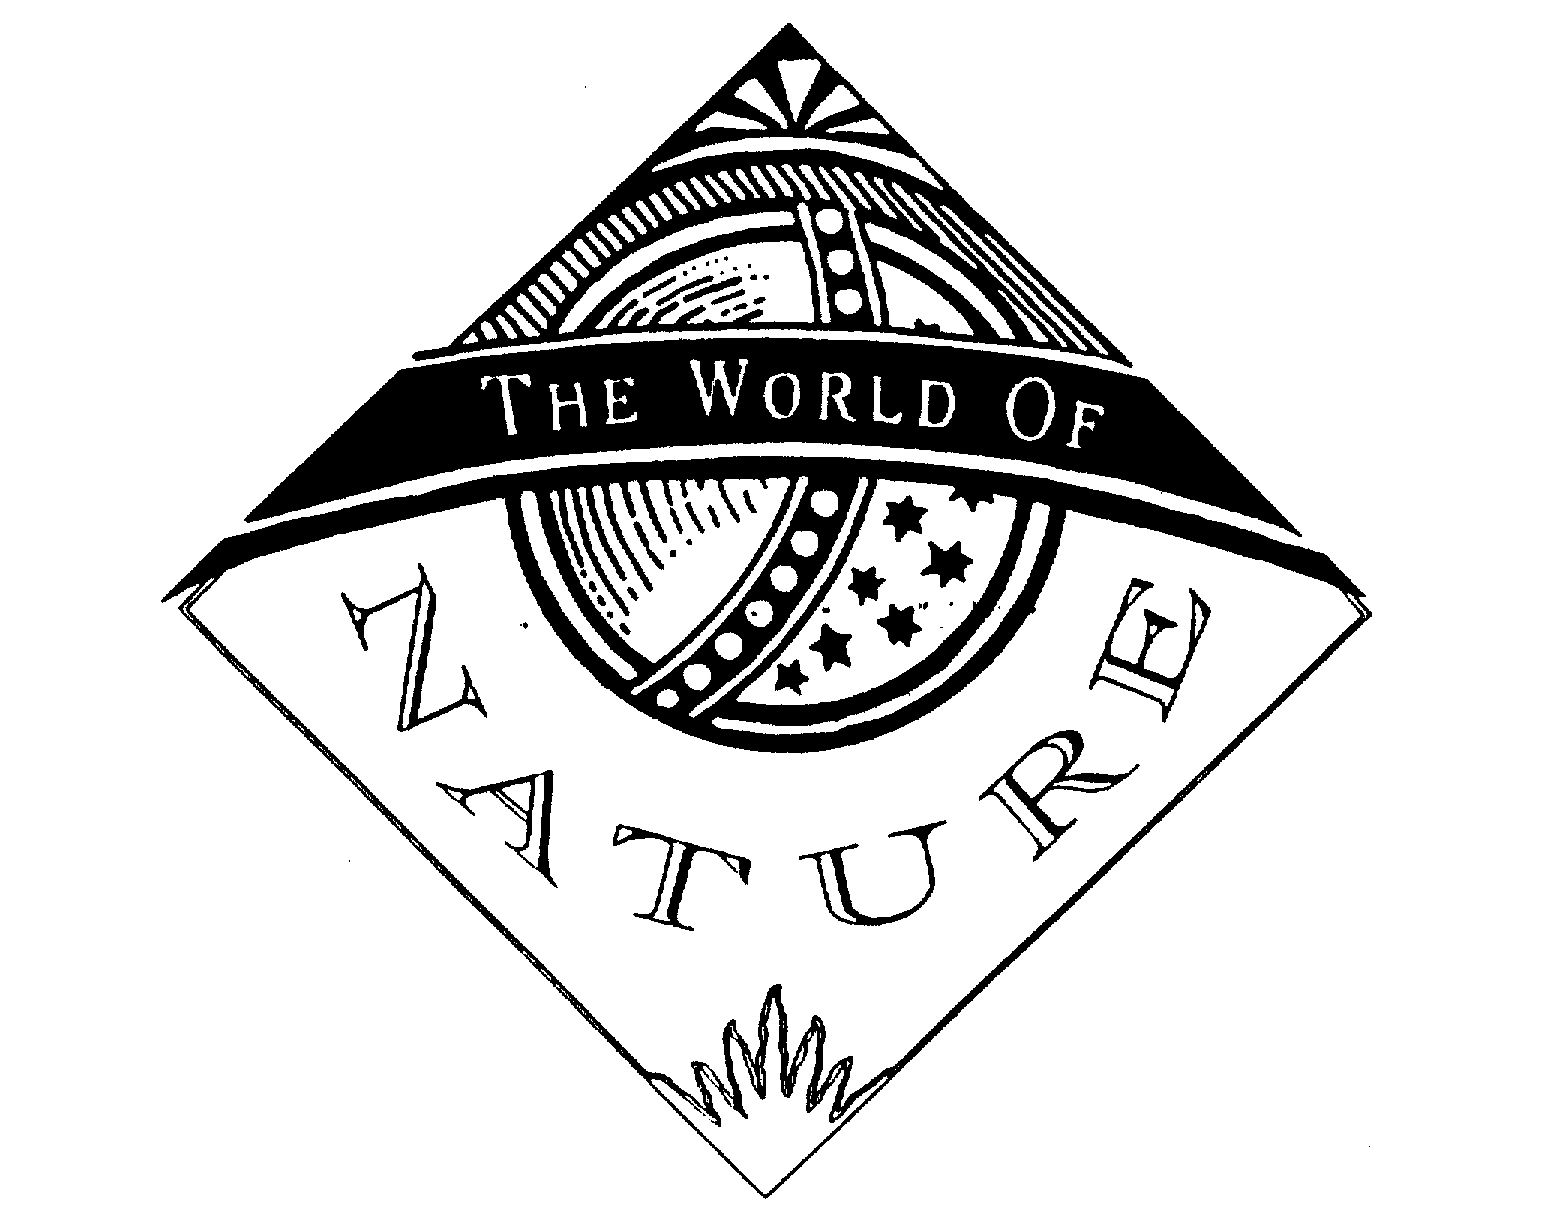  THE WORLD OF NATURE